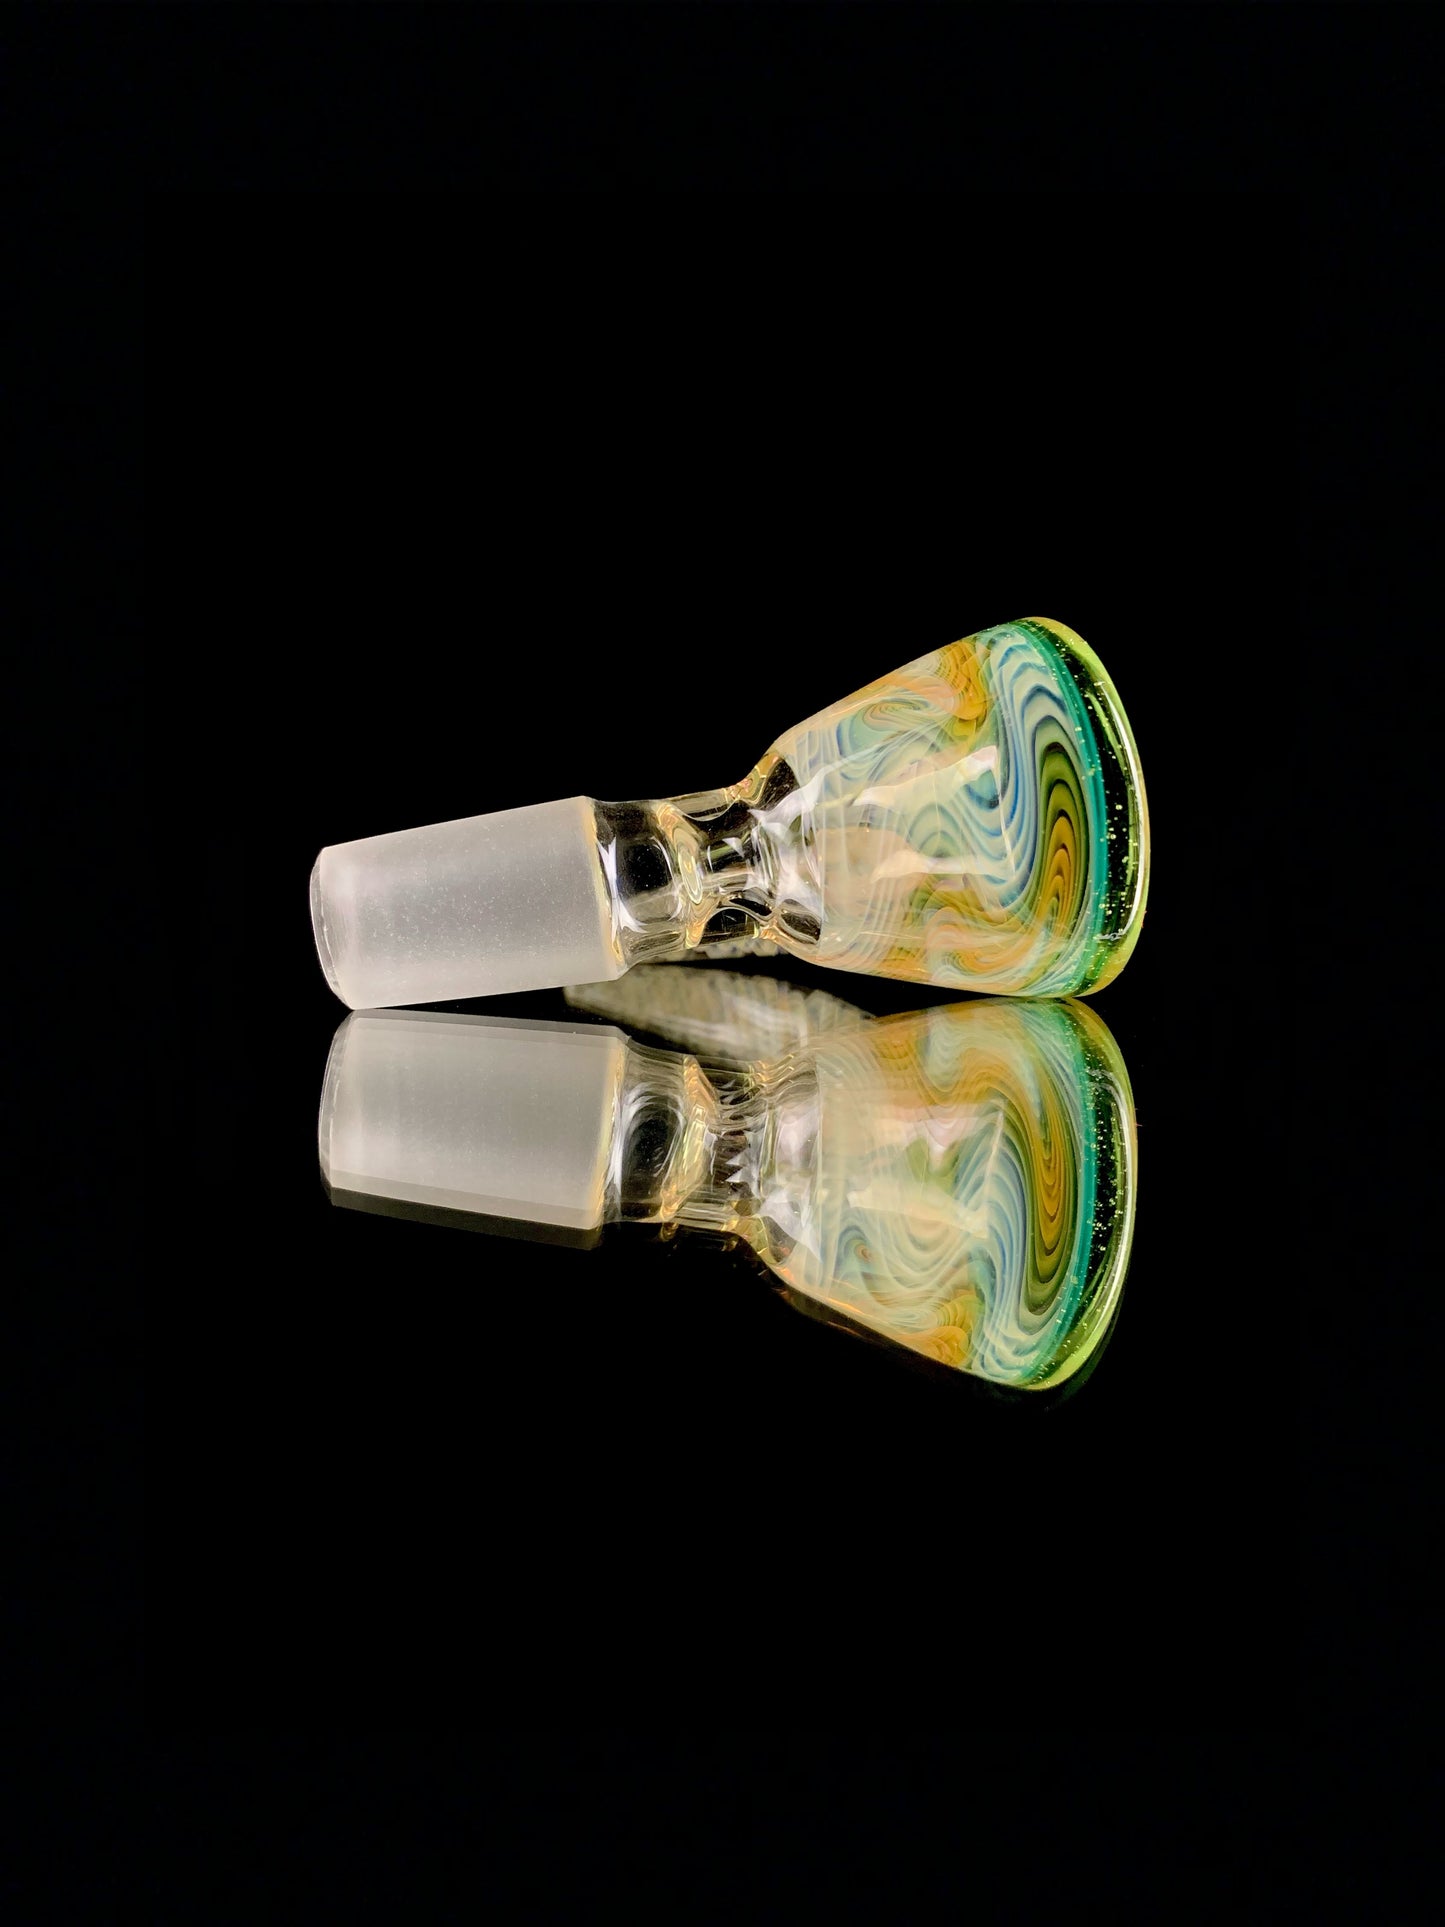 14mm fume / crippy slide by Phase Glass